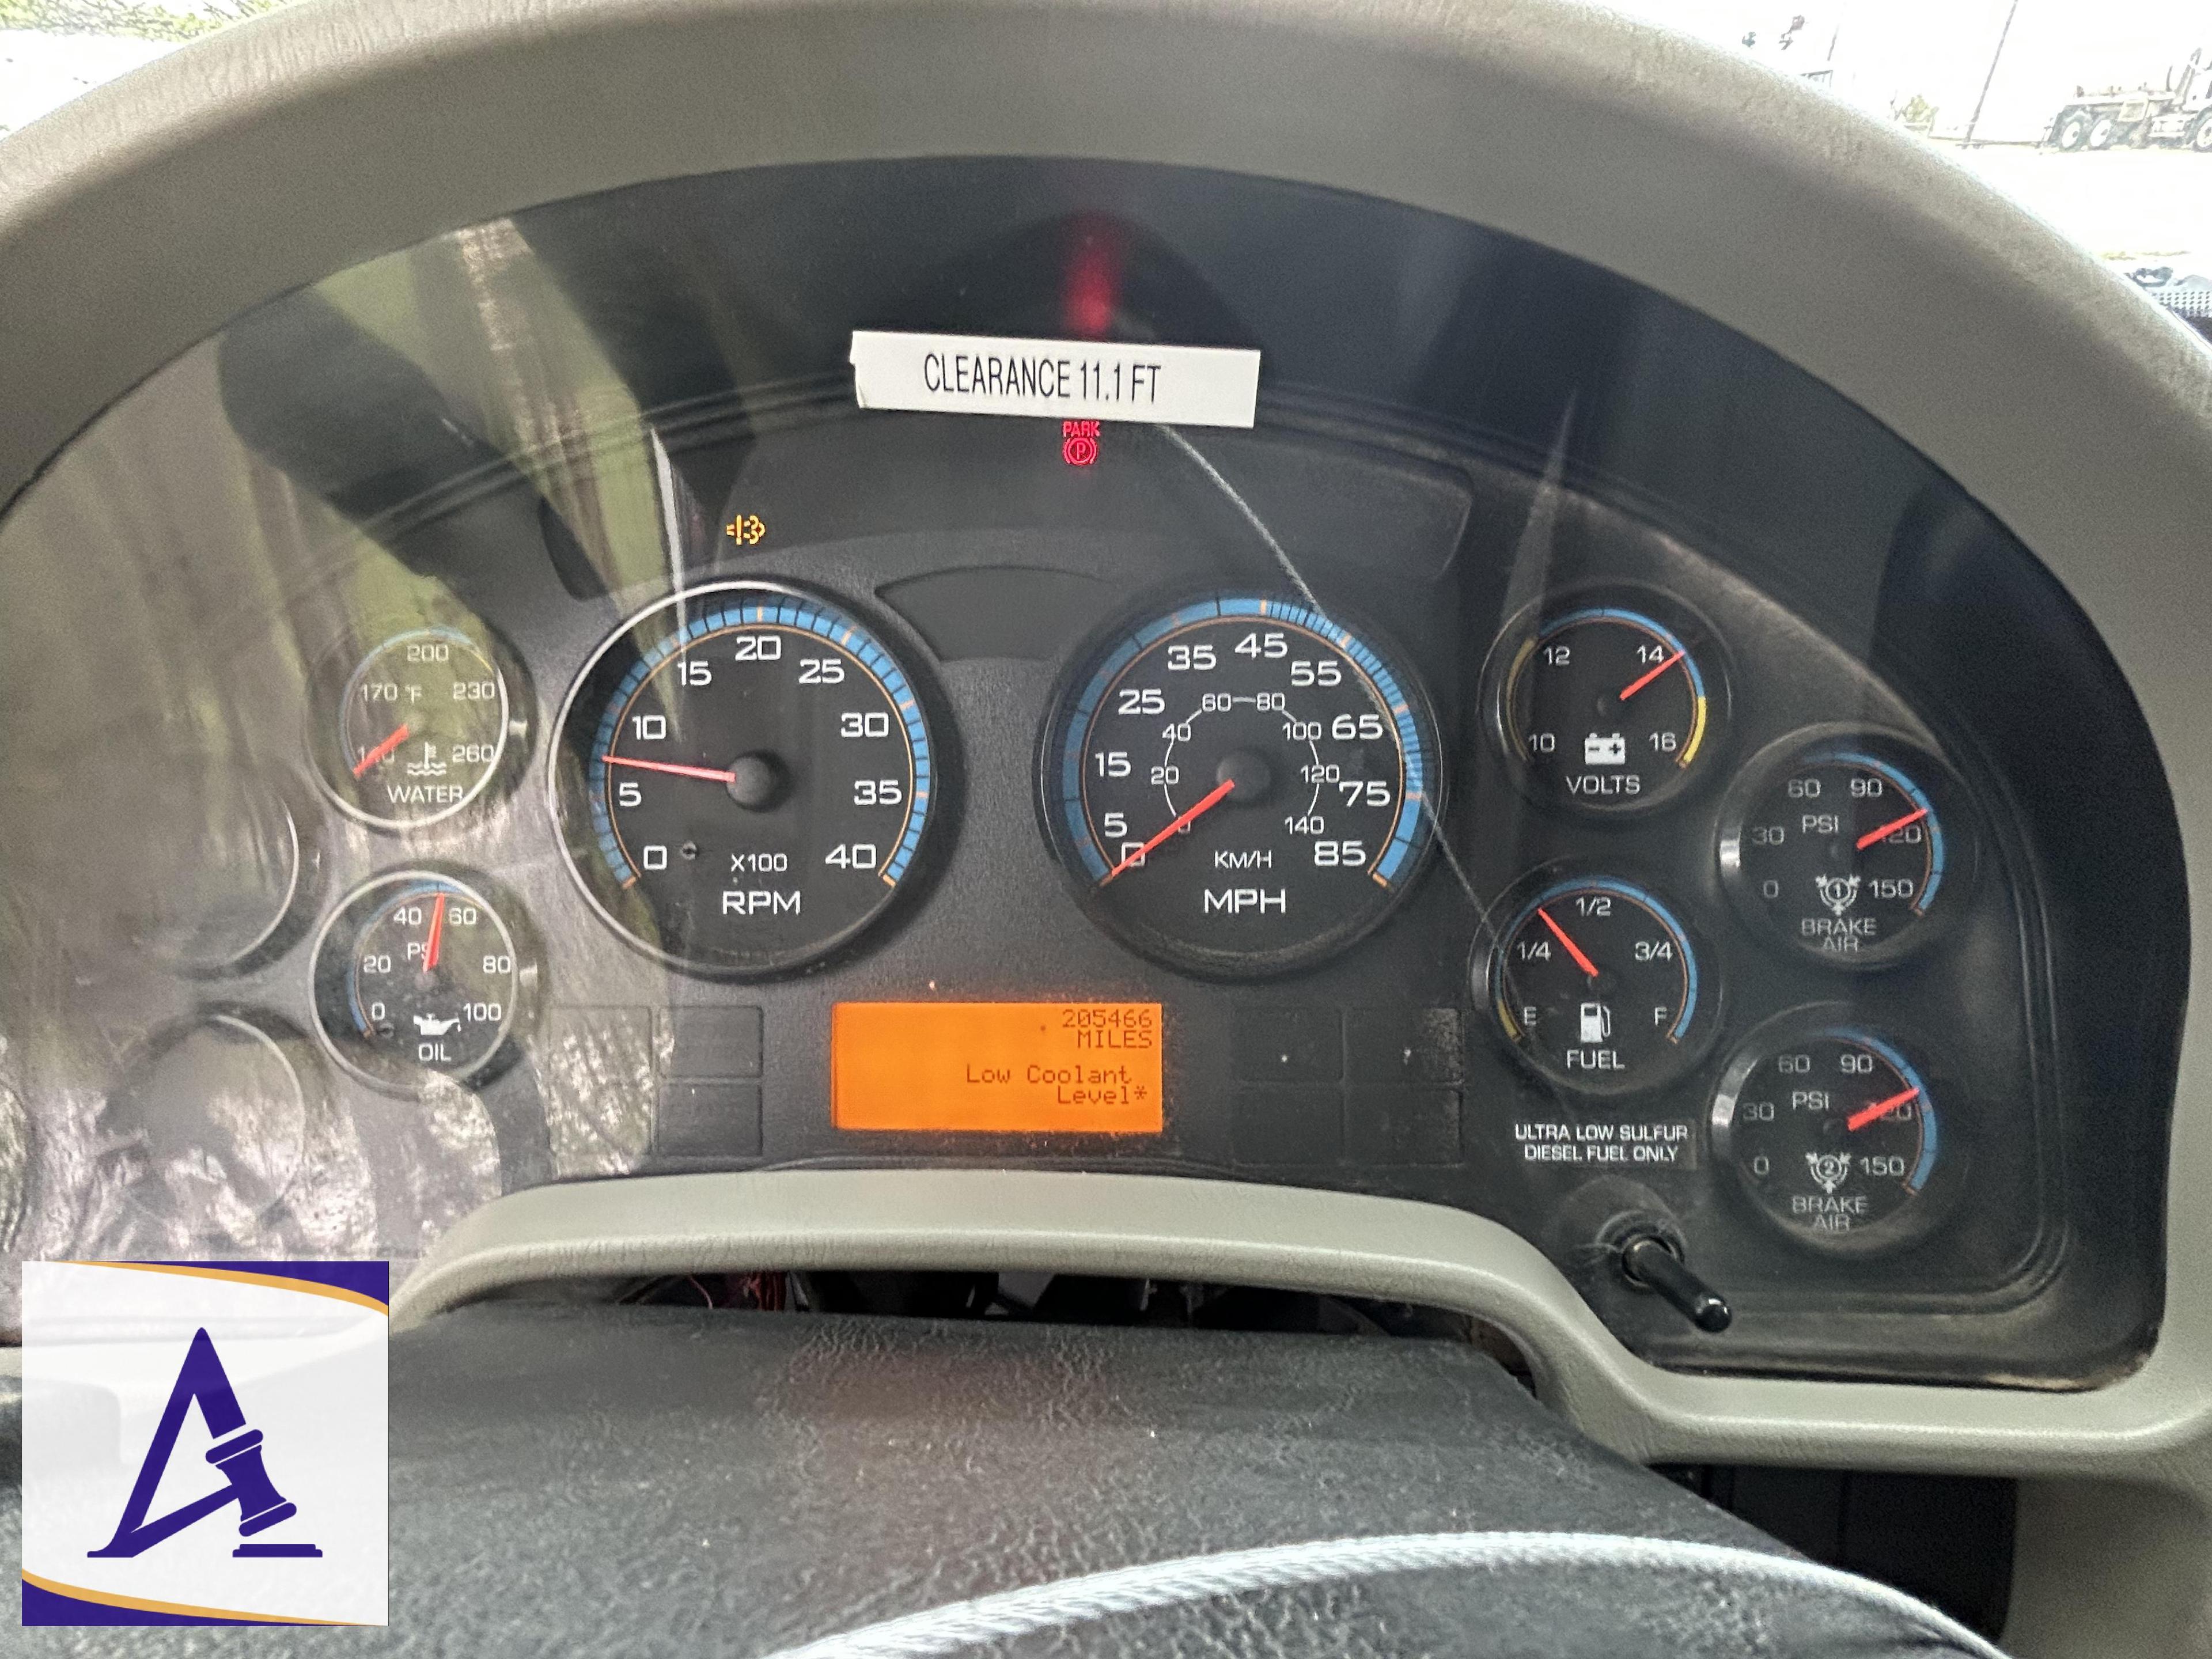 2010 International 4300 Wireline Truck with Only 20,546 Miles! Incredible!